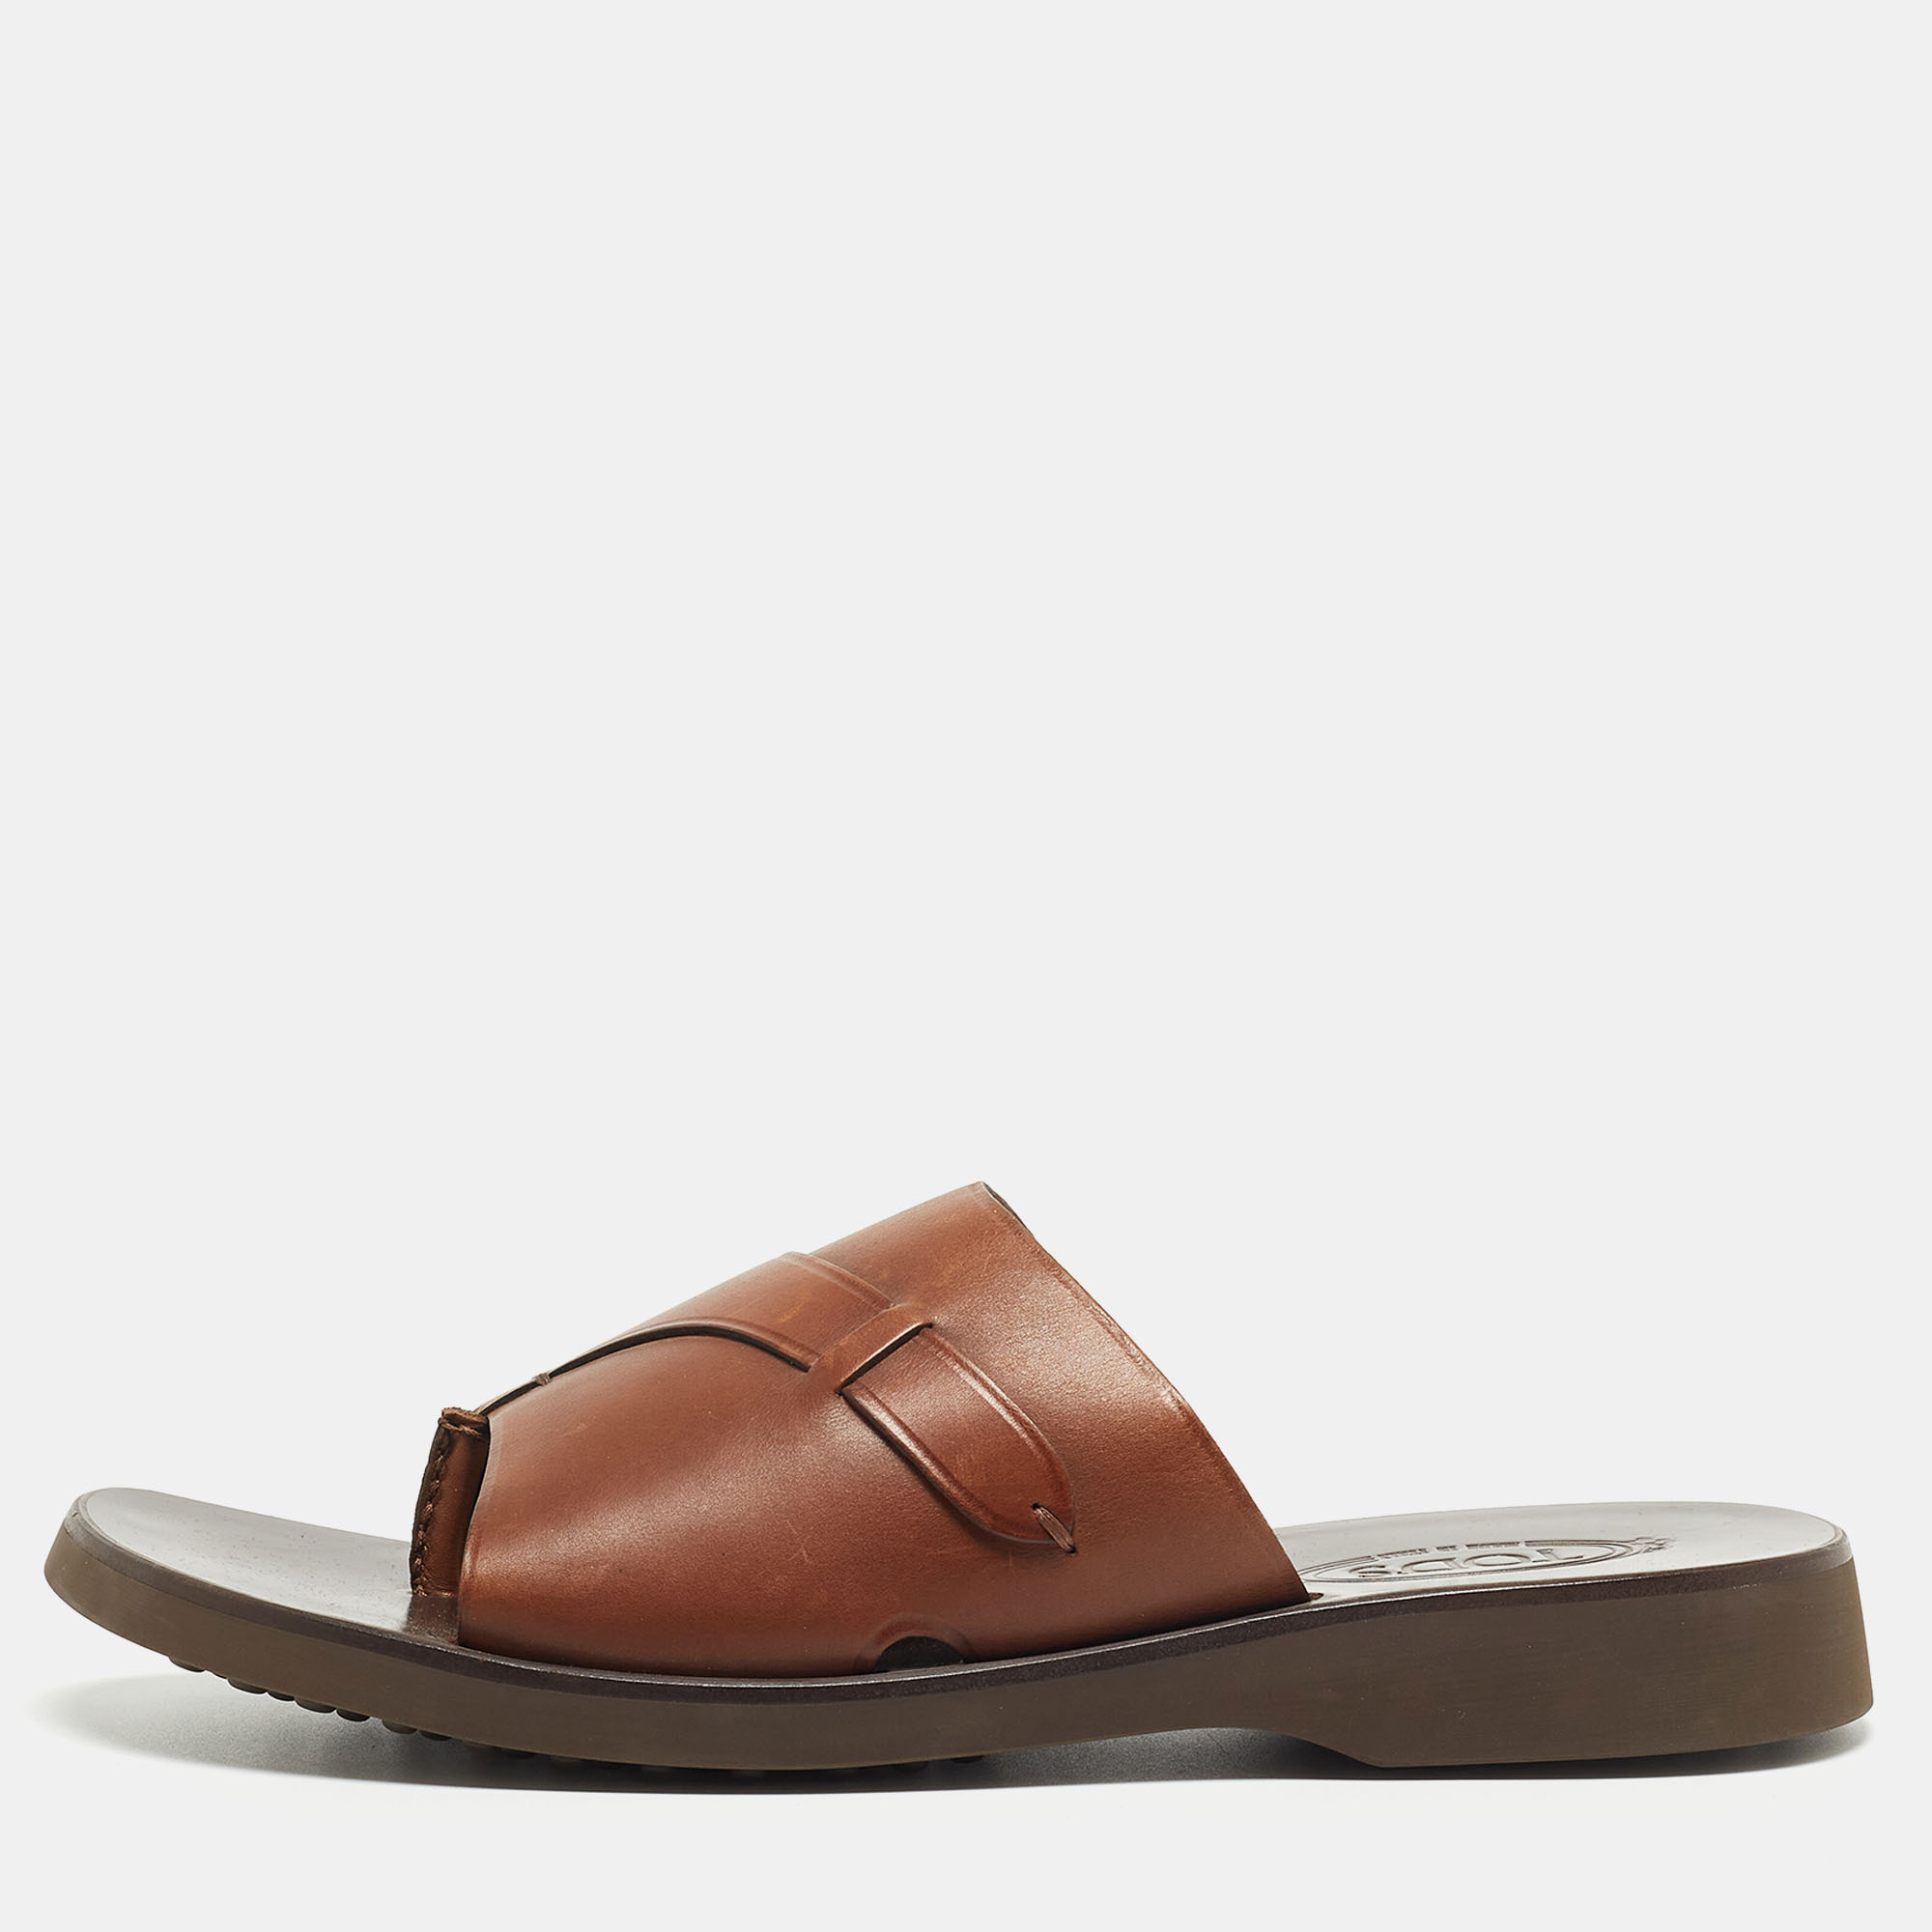 

Tod's Brown Leather Slide Sandals Size